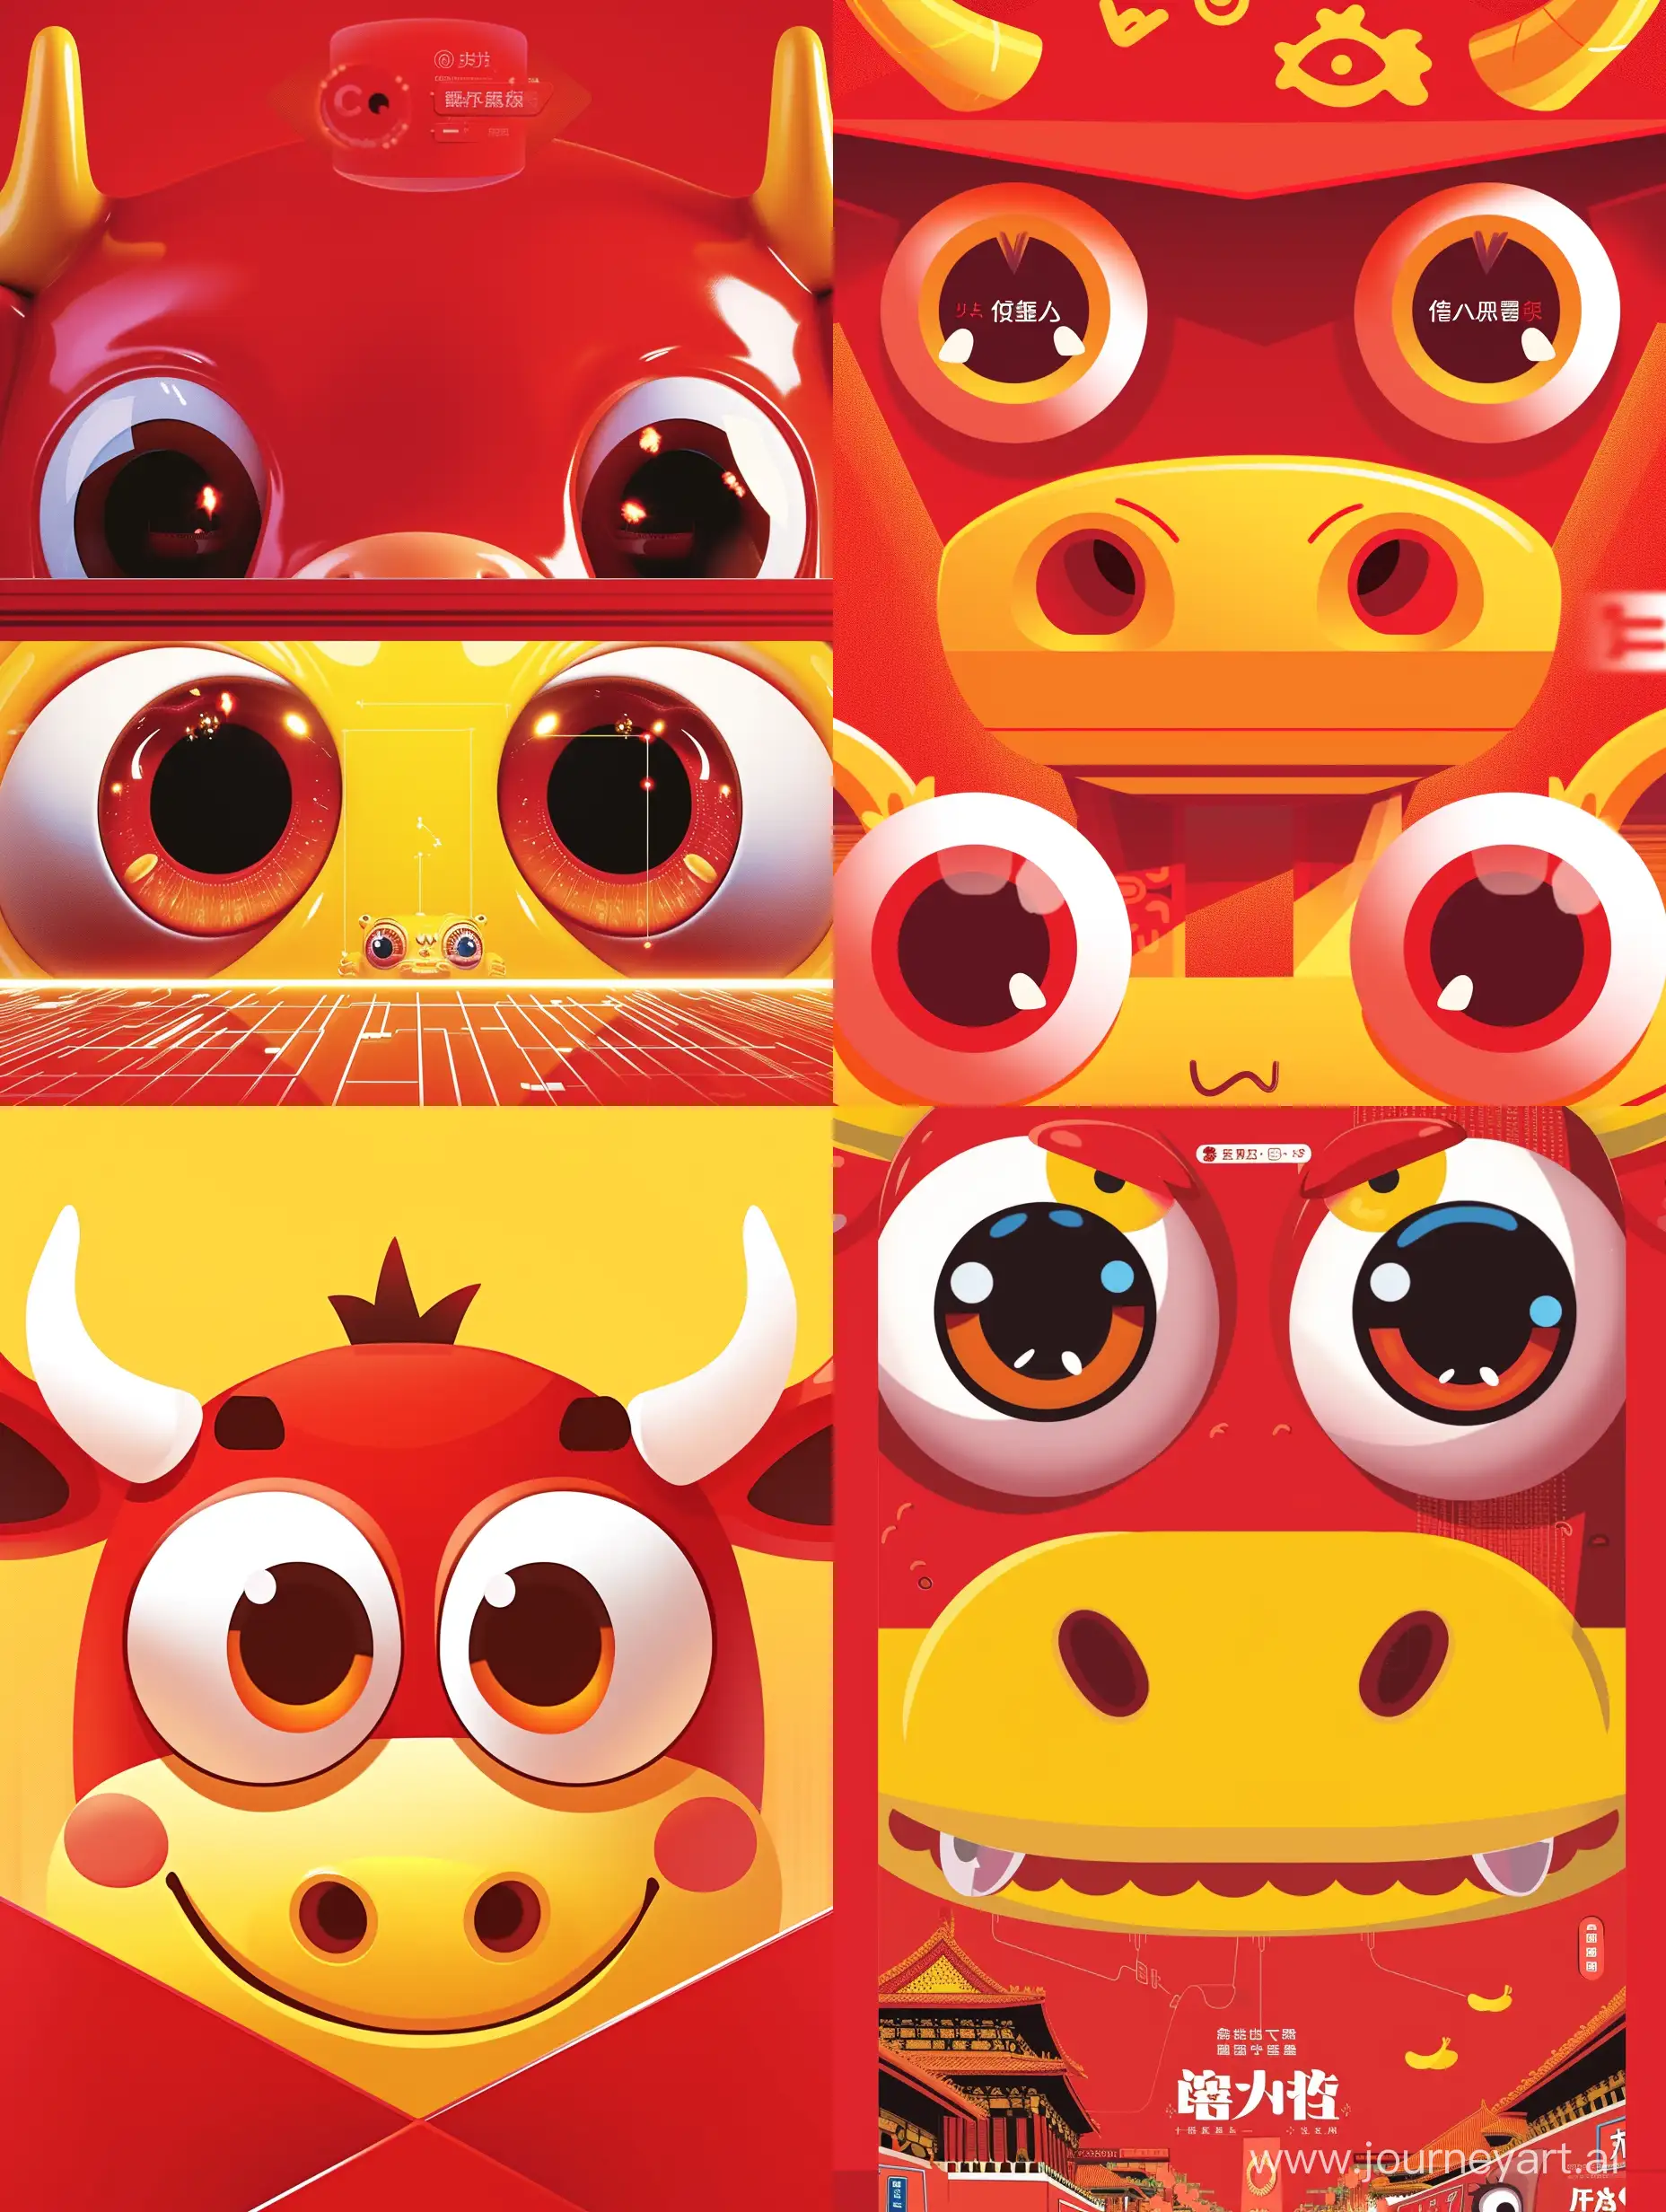 Design a WeChat red envelope cover with a sense of technology, with red and yellow as the main color tone, including the large "cow" character, and two smiling big eyes staring at the screen.